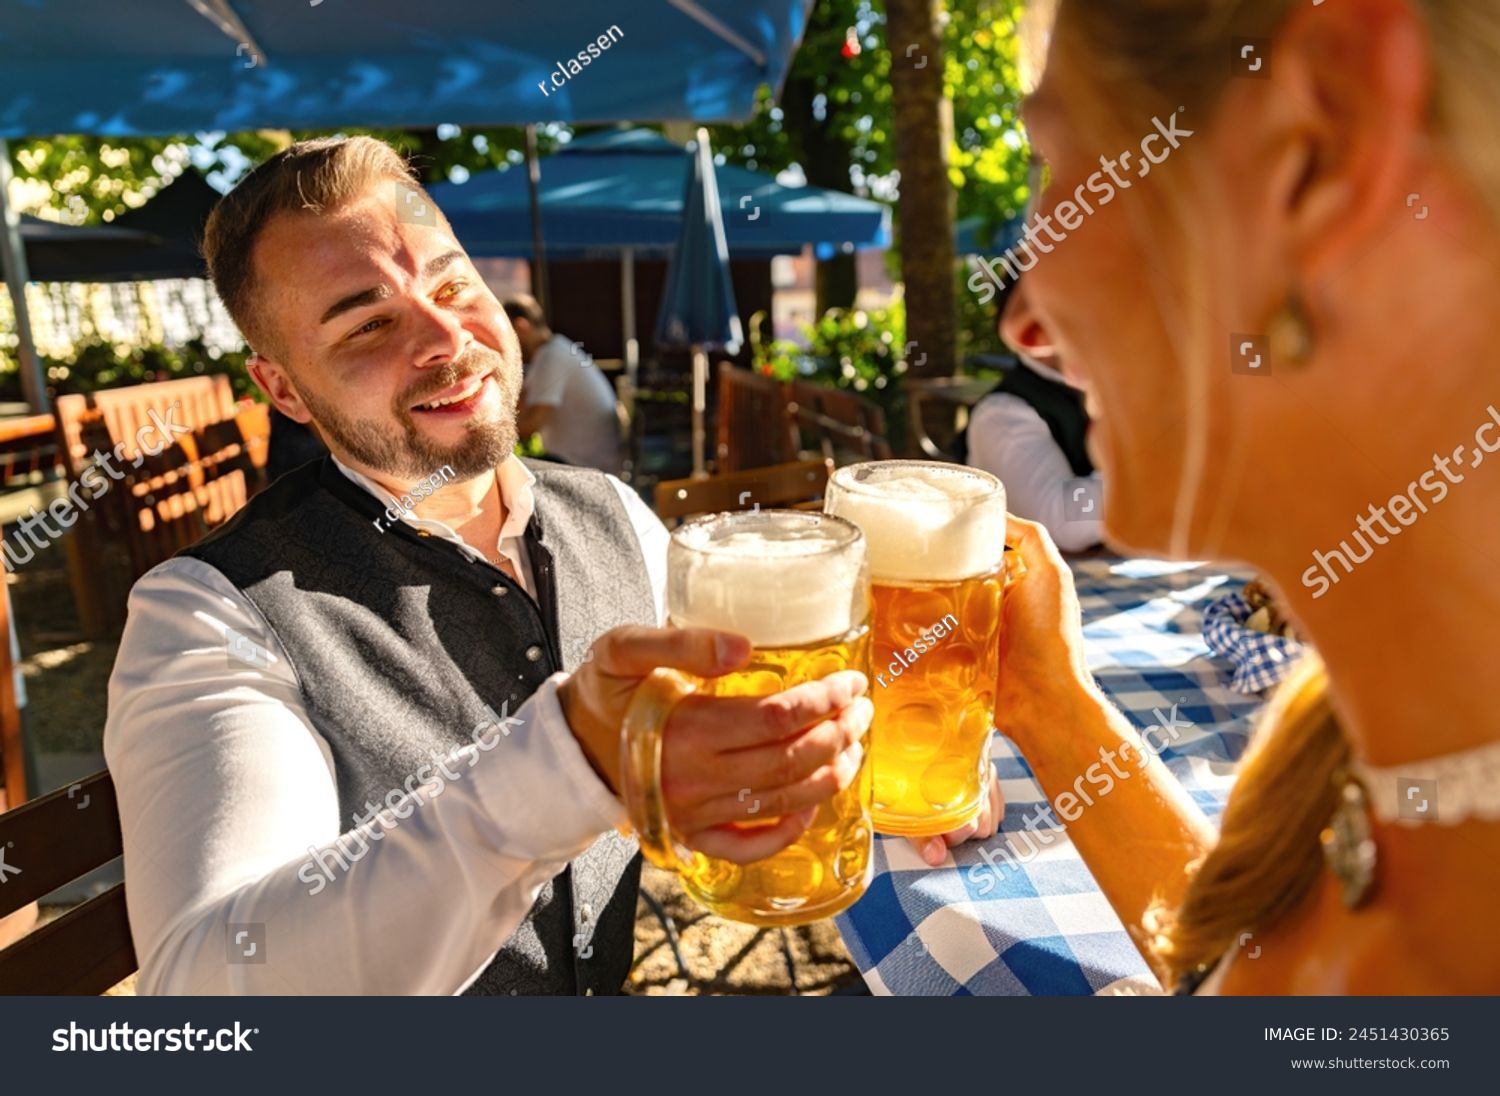 smiling man in traditional attire toasting with a woman in tracht at oktoberfest or beer garden in germany #2451430365